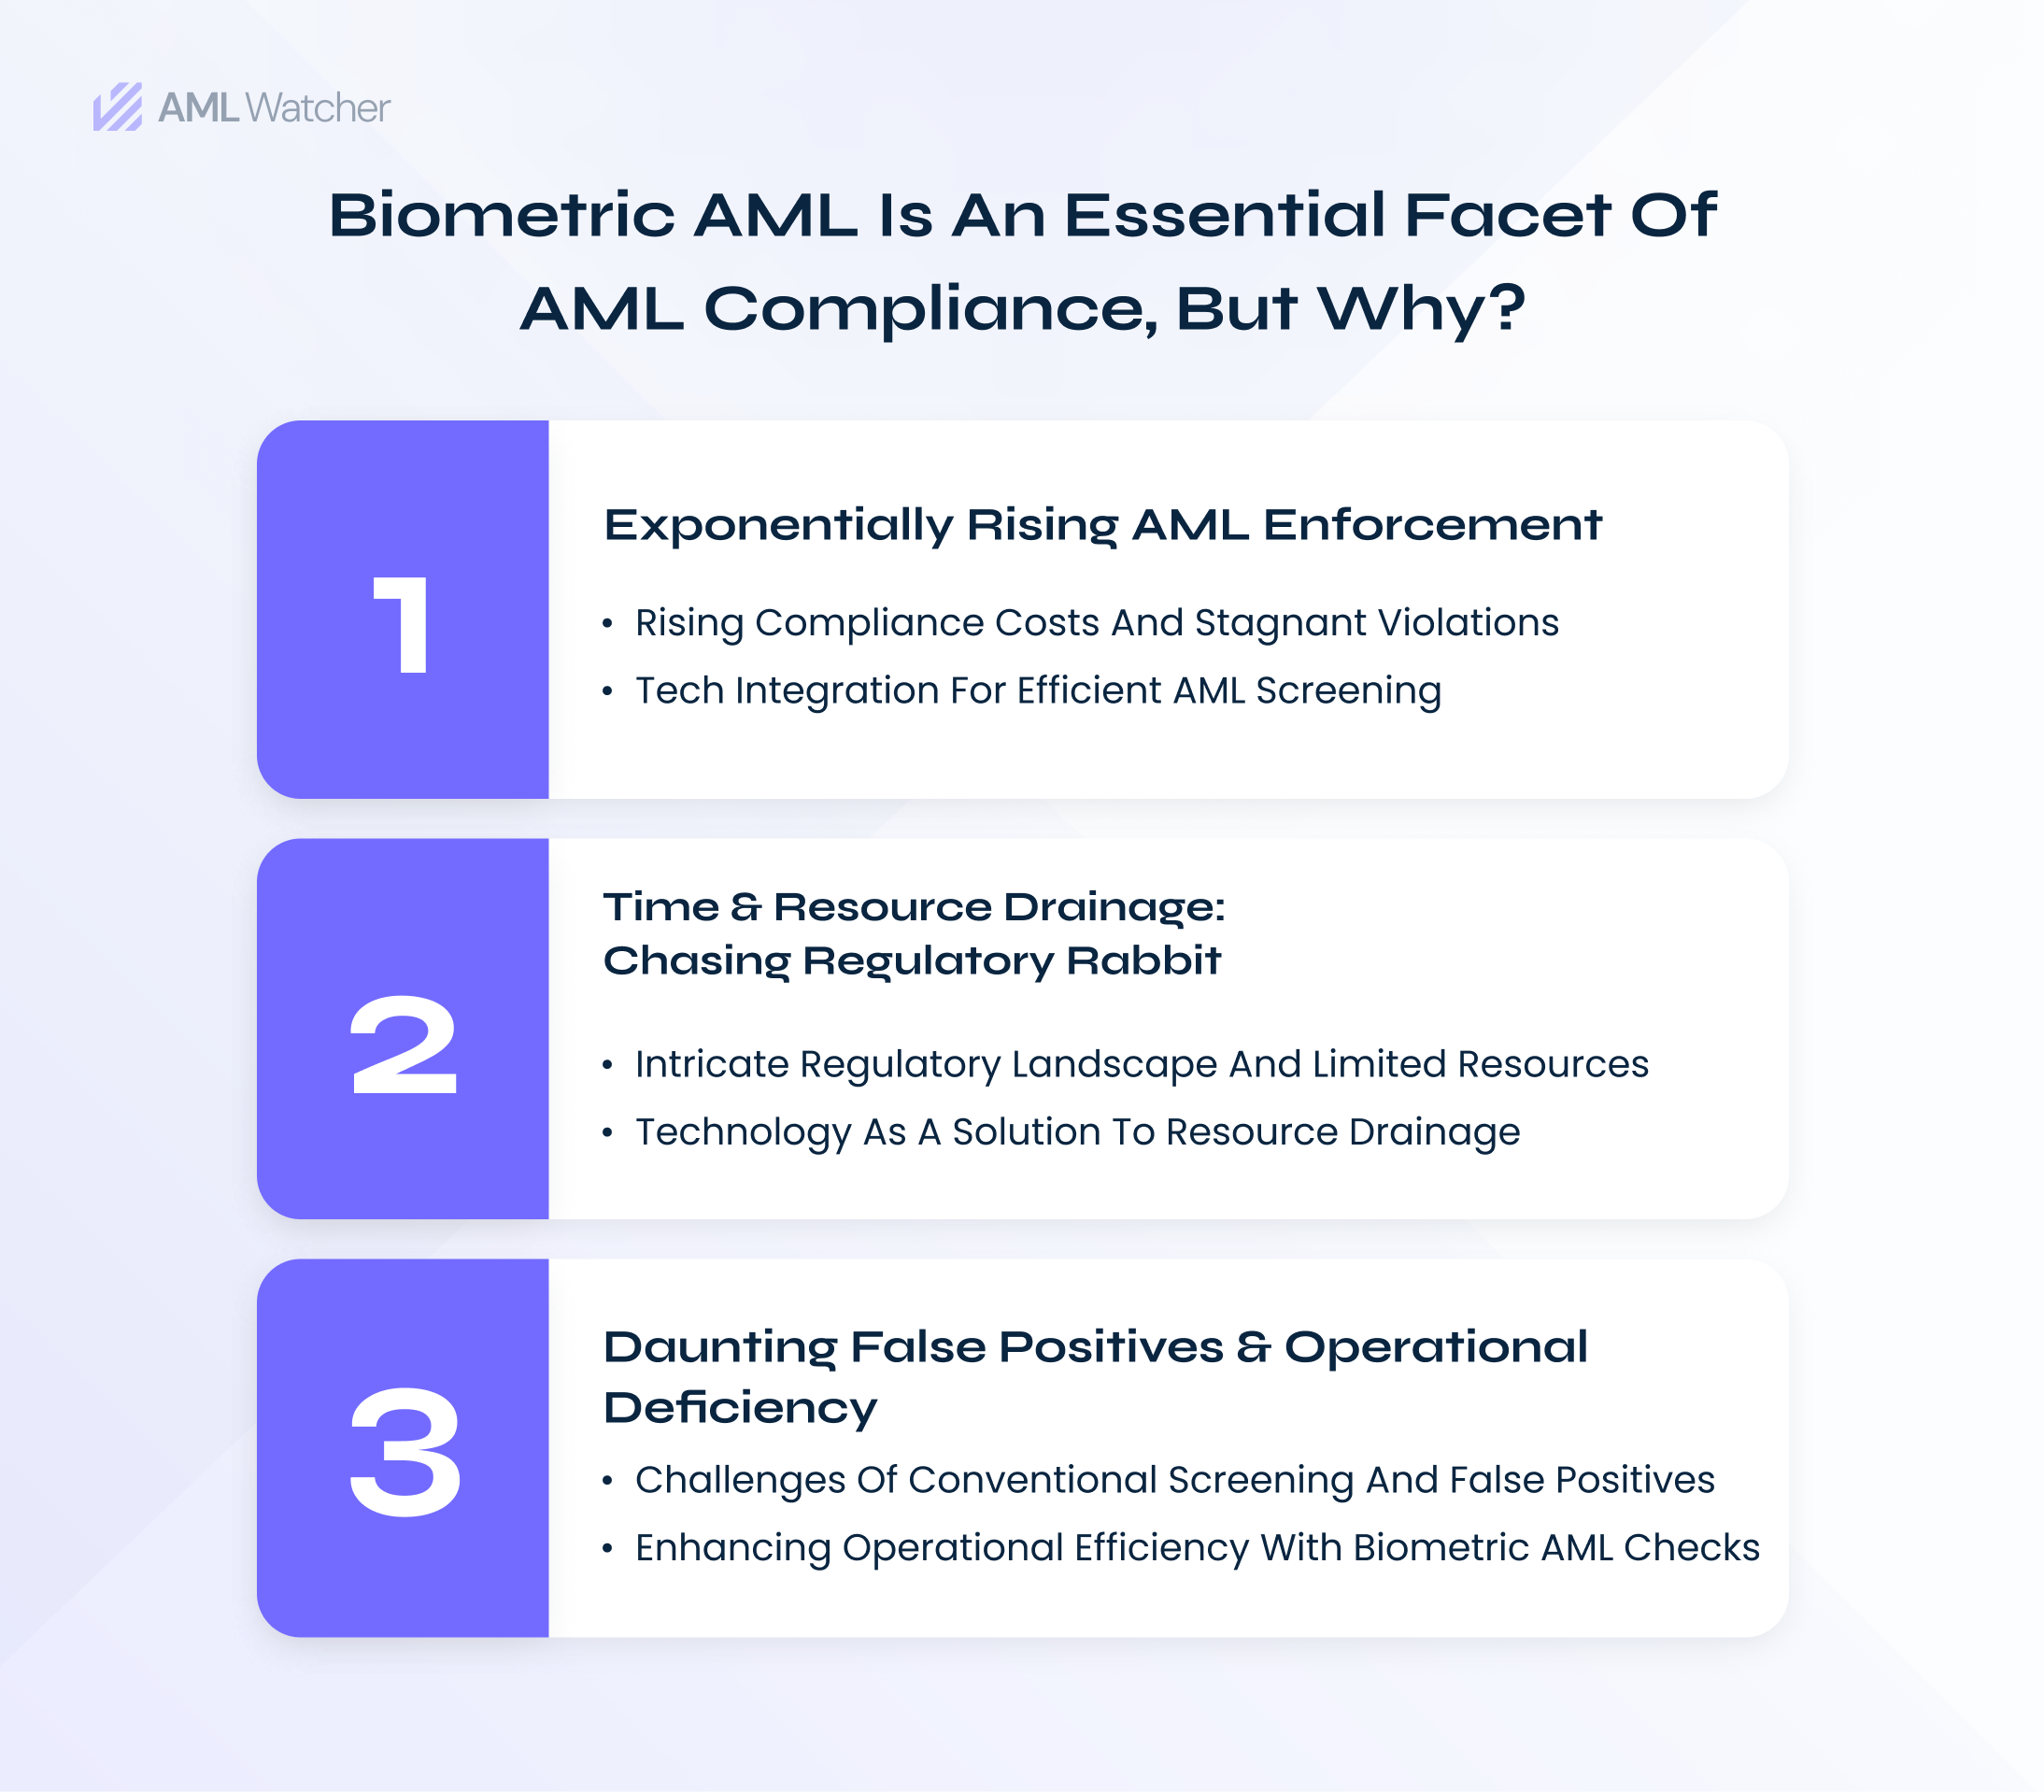 The image describes the reasons which highlight the need of biometric AML integration into compliance measures. 